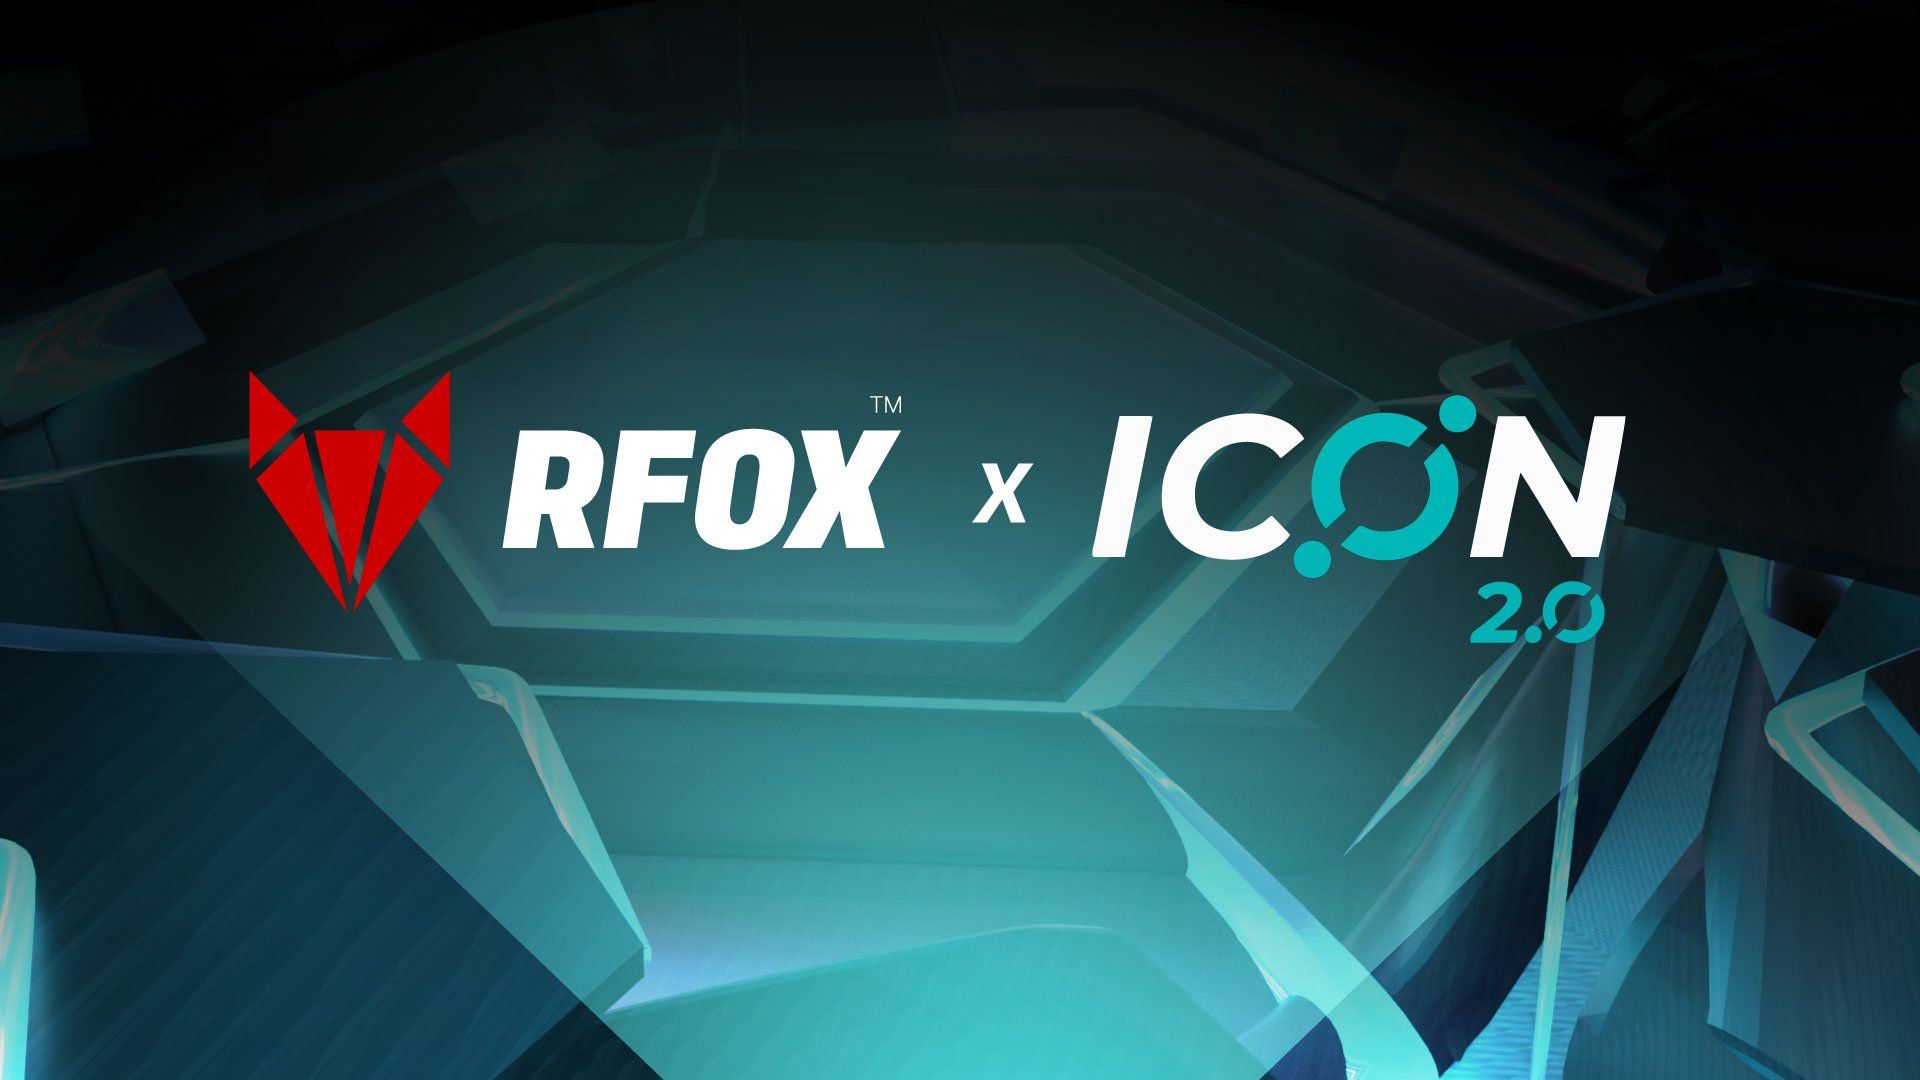 A banner of RFOX and ICON 2